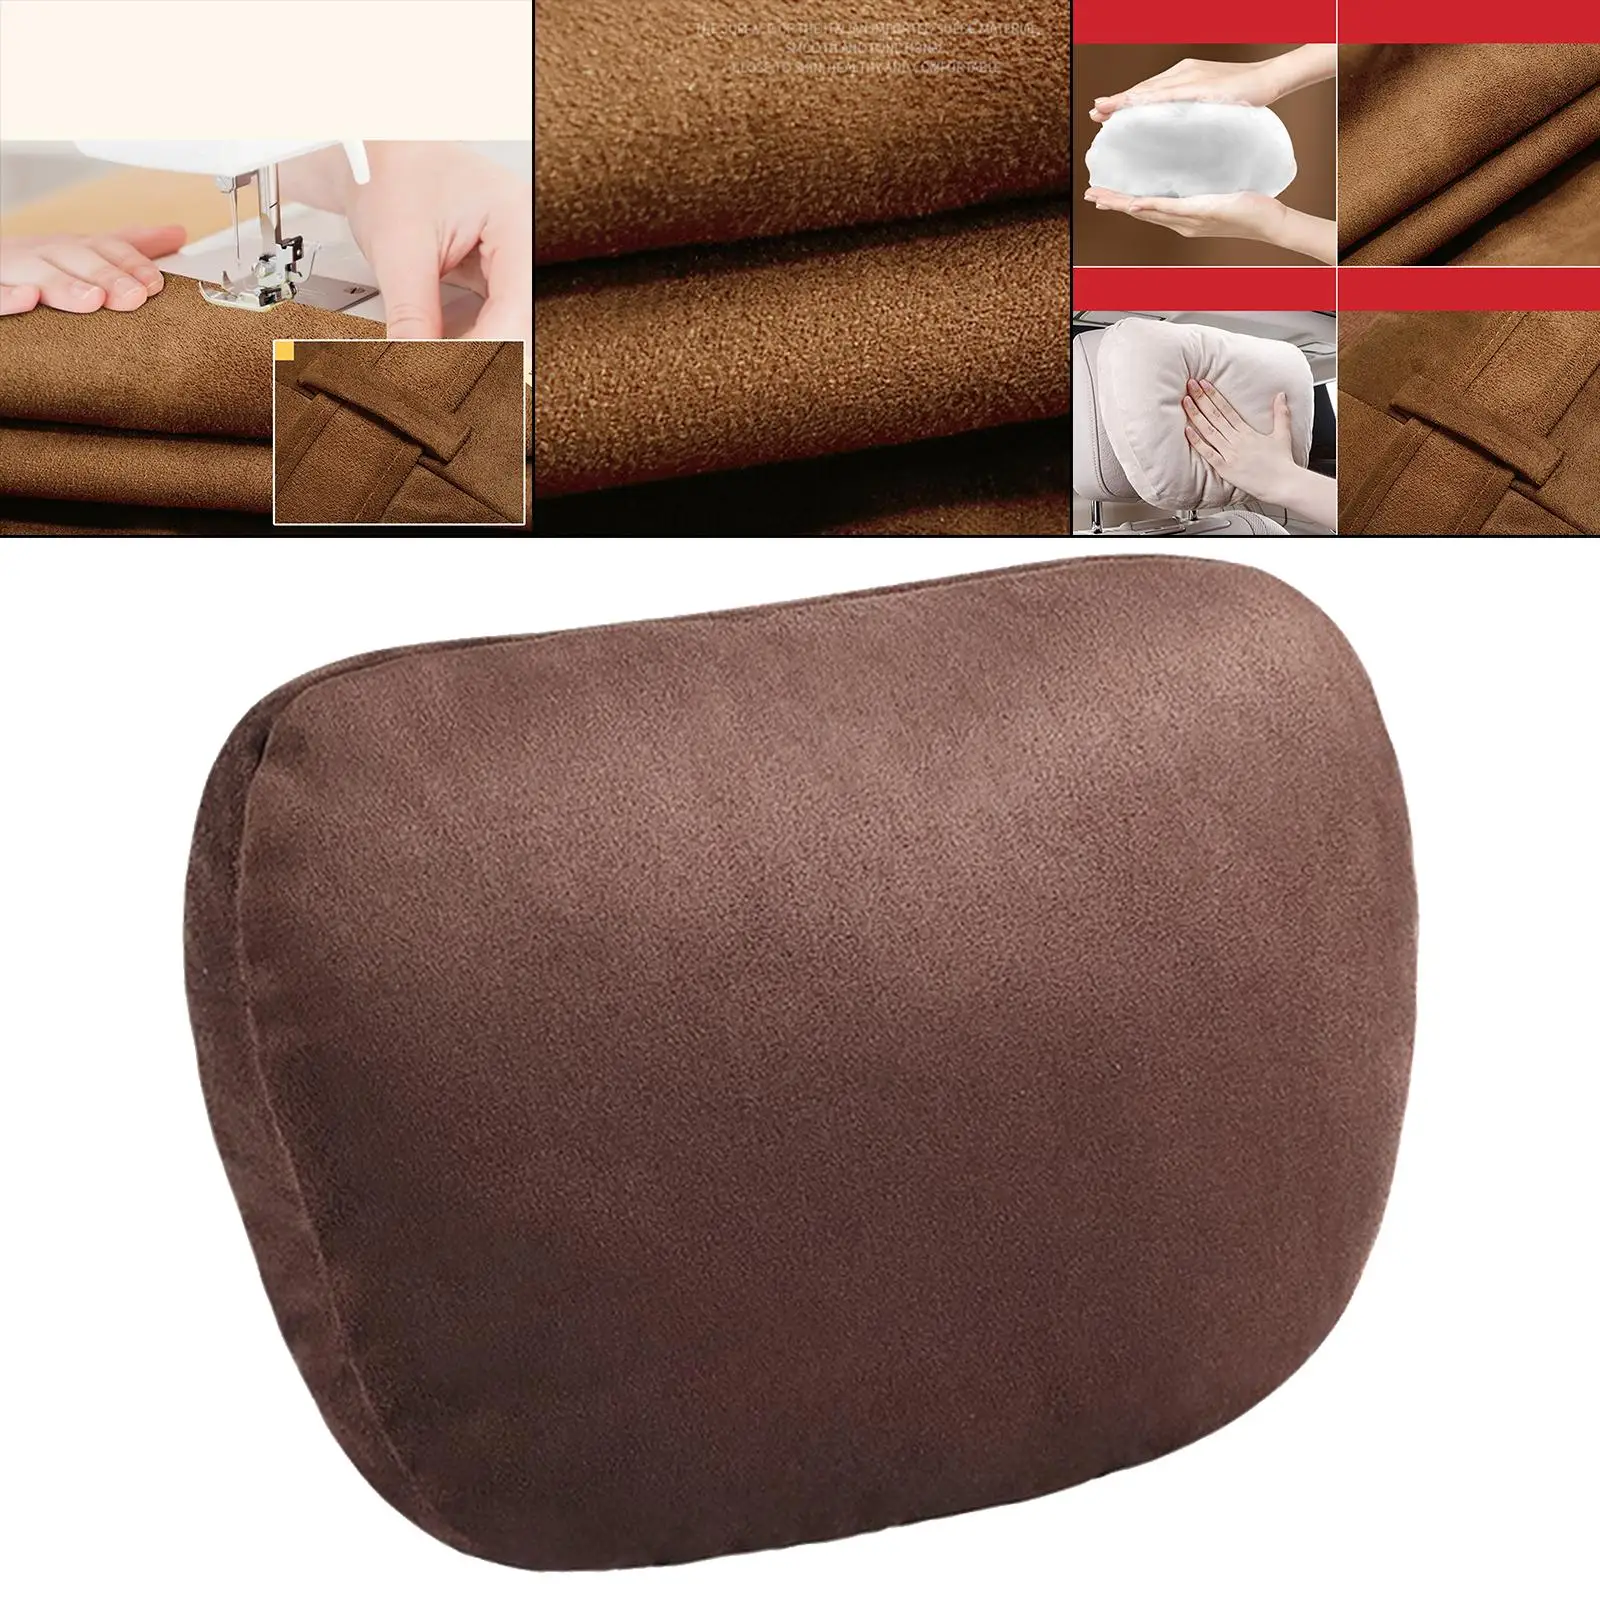 Car Headrest Down Cotton Removable Relieve Neck Pain Adjustable Soft Neck Rest  Fit for Travelling Gaming Resting Home